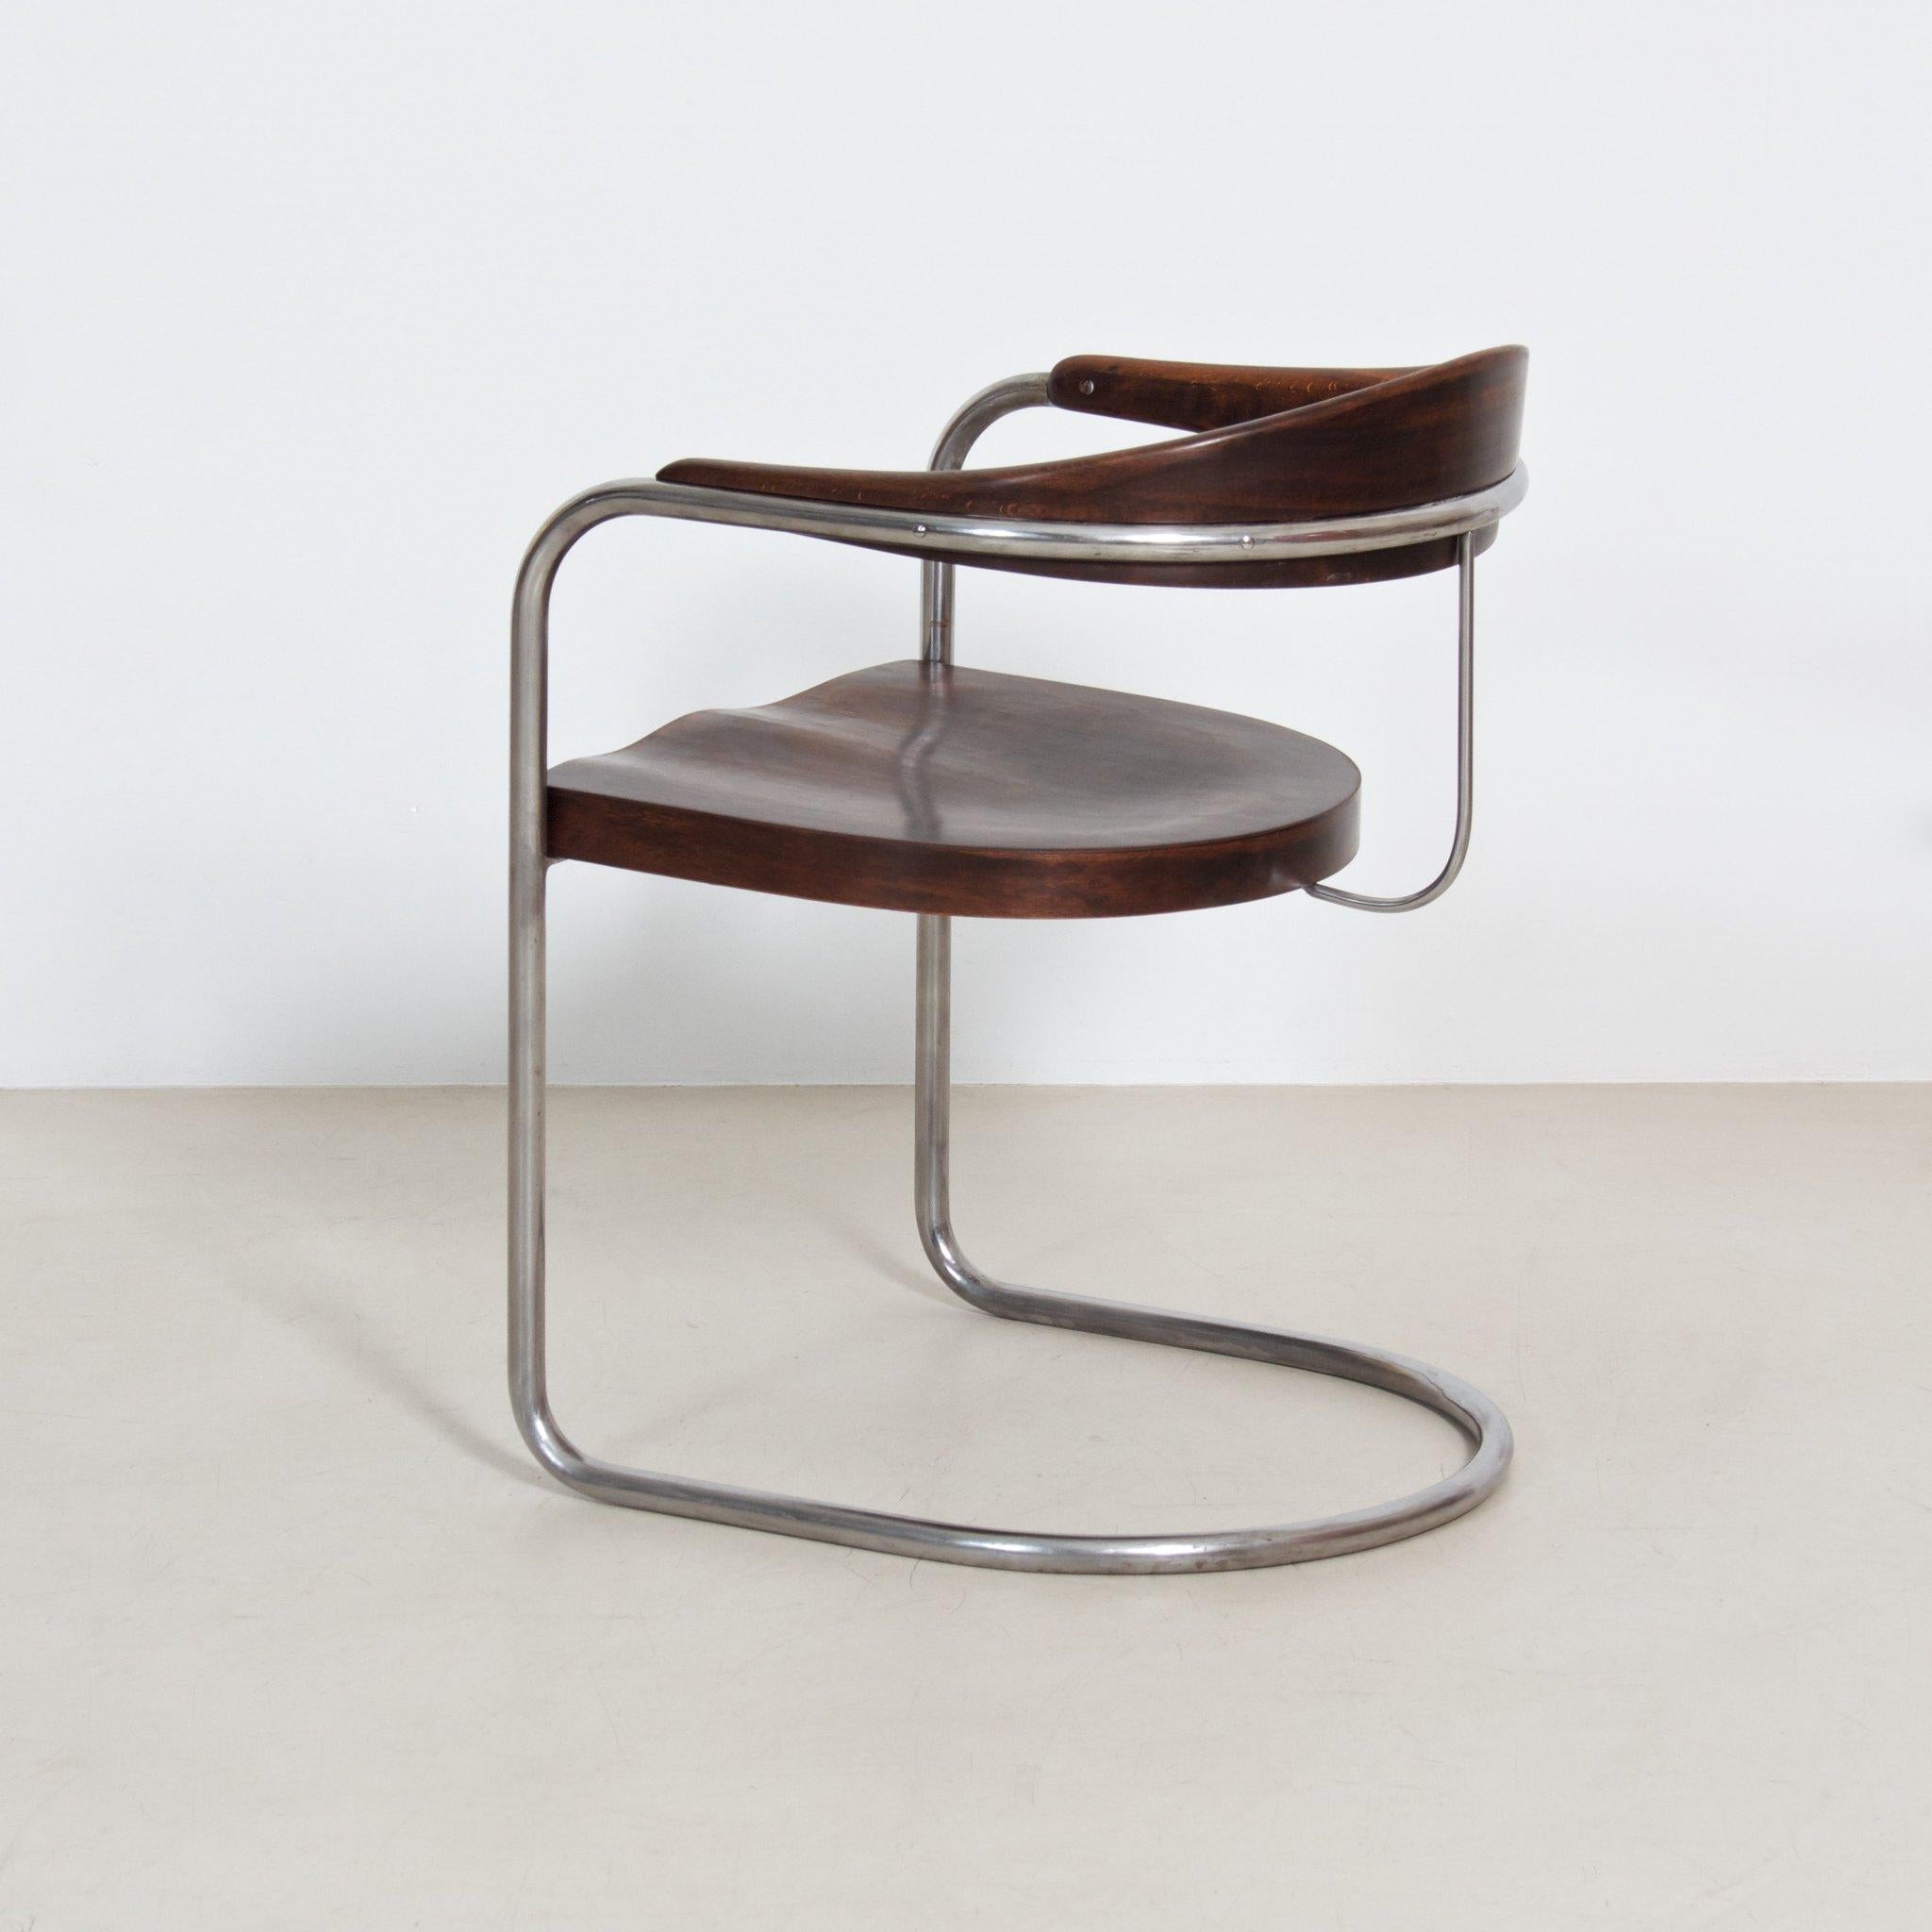 Bauhaus Cantilever Armchair by Luckhardt Brothers, Chromed Metal, Stained Wood In Good Condition For Sale In Berlin, DE